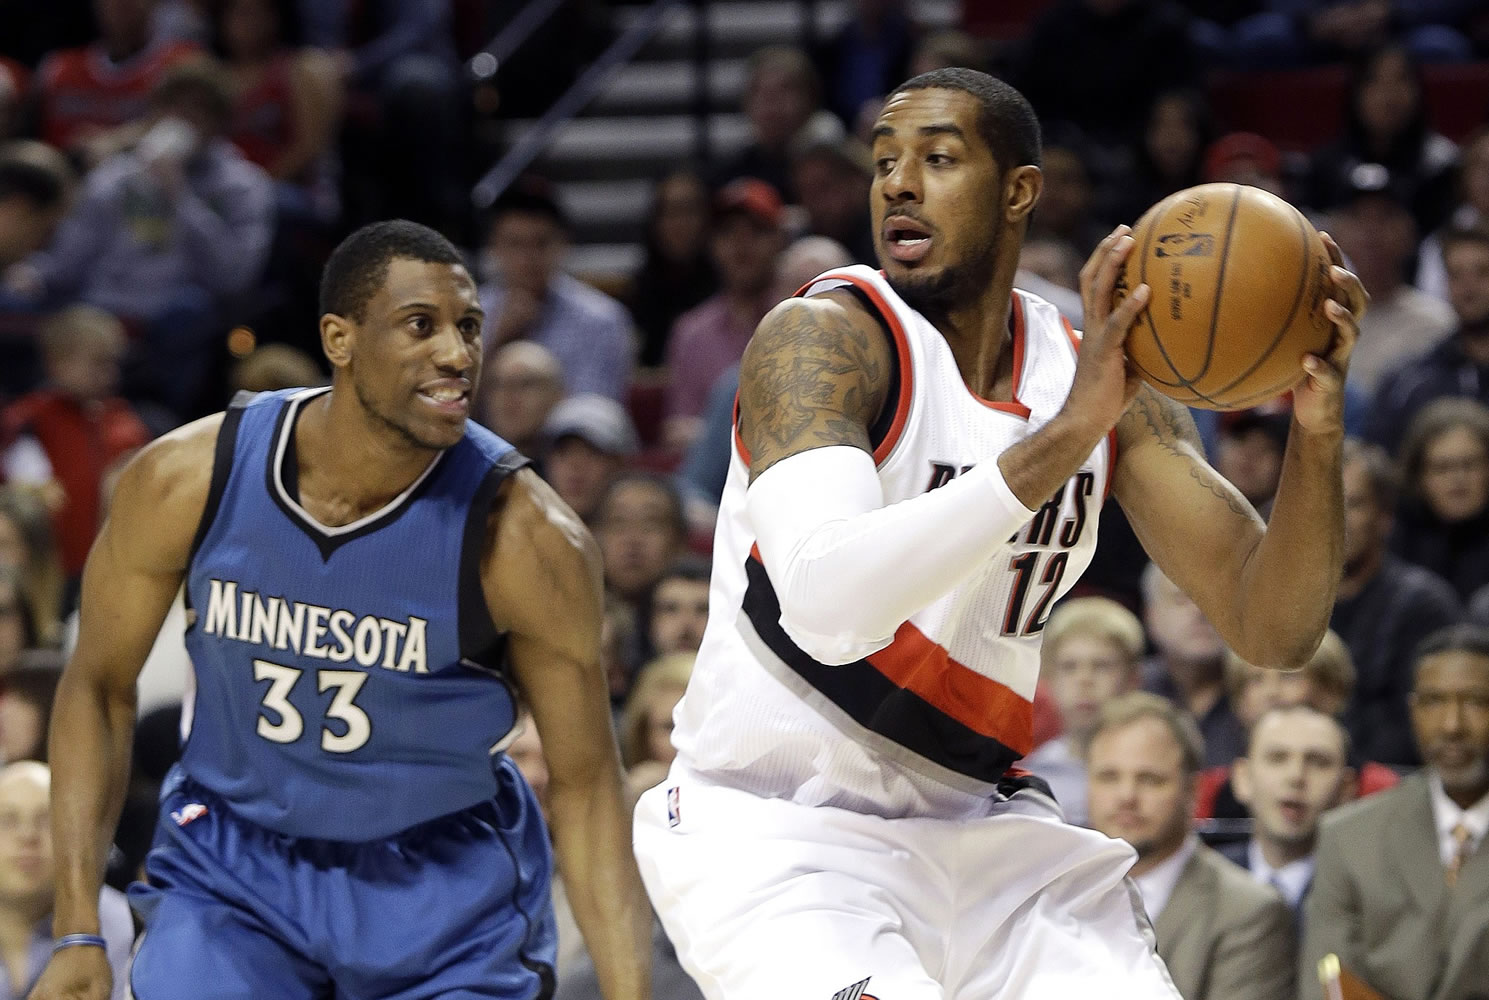 Portland Trail Blazers forward LaMarcus Aldridge looks for an opening as Minnesota Timberwolves forward Thadeus Young, left, defends during the first half Sunday, Nov. 30, 2014.